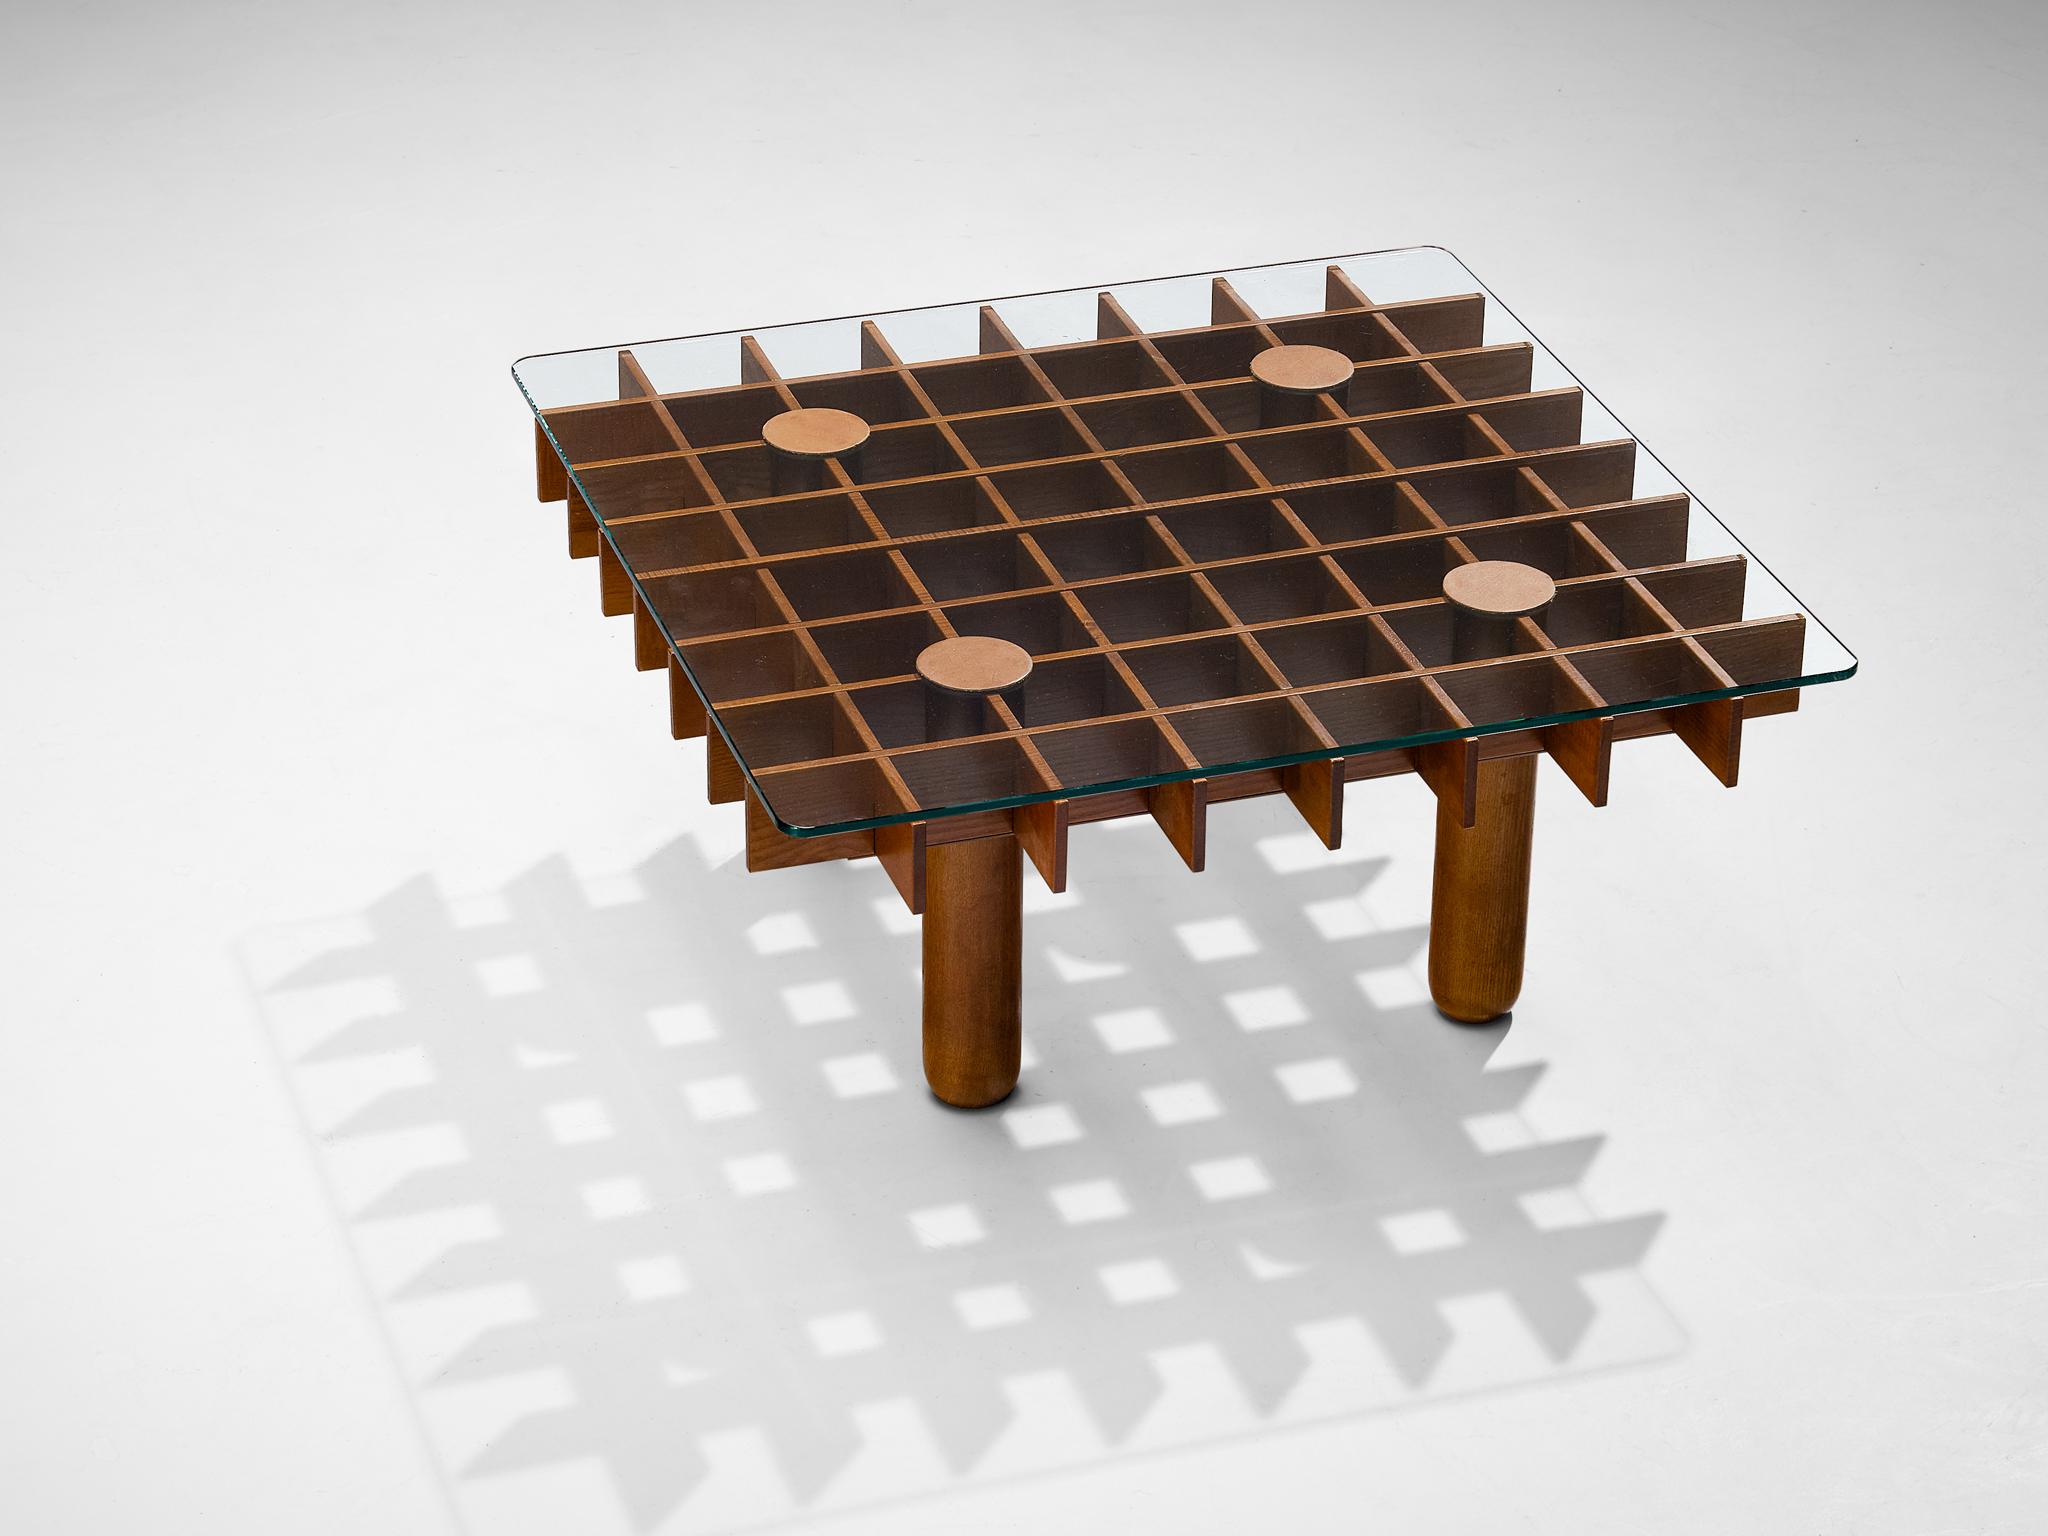 Coffee table, maple, leather, glass, Italy, 1970s

This maple coffee table from Italy consists of a wooden grid, build up out of maple laths. Four solid round legs end up in four round ends. On top of the grid rests a glass top. The construction